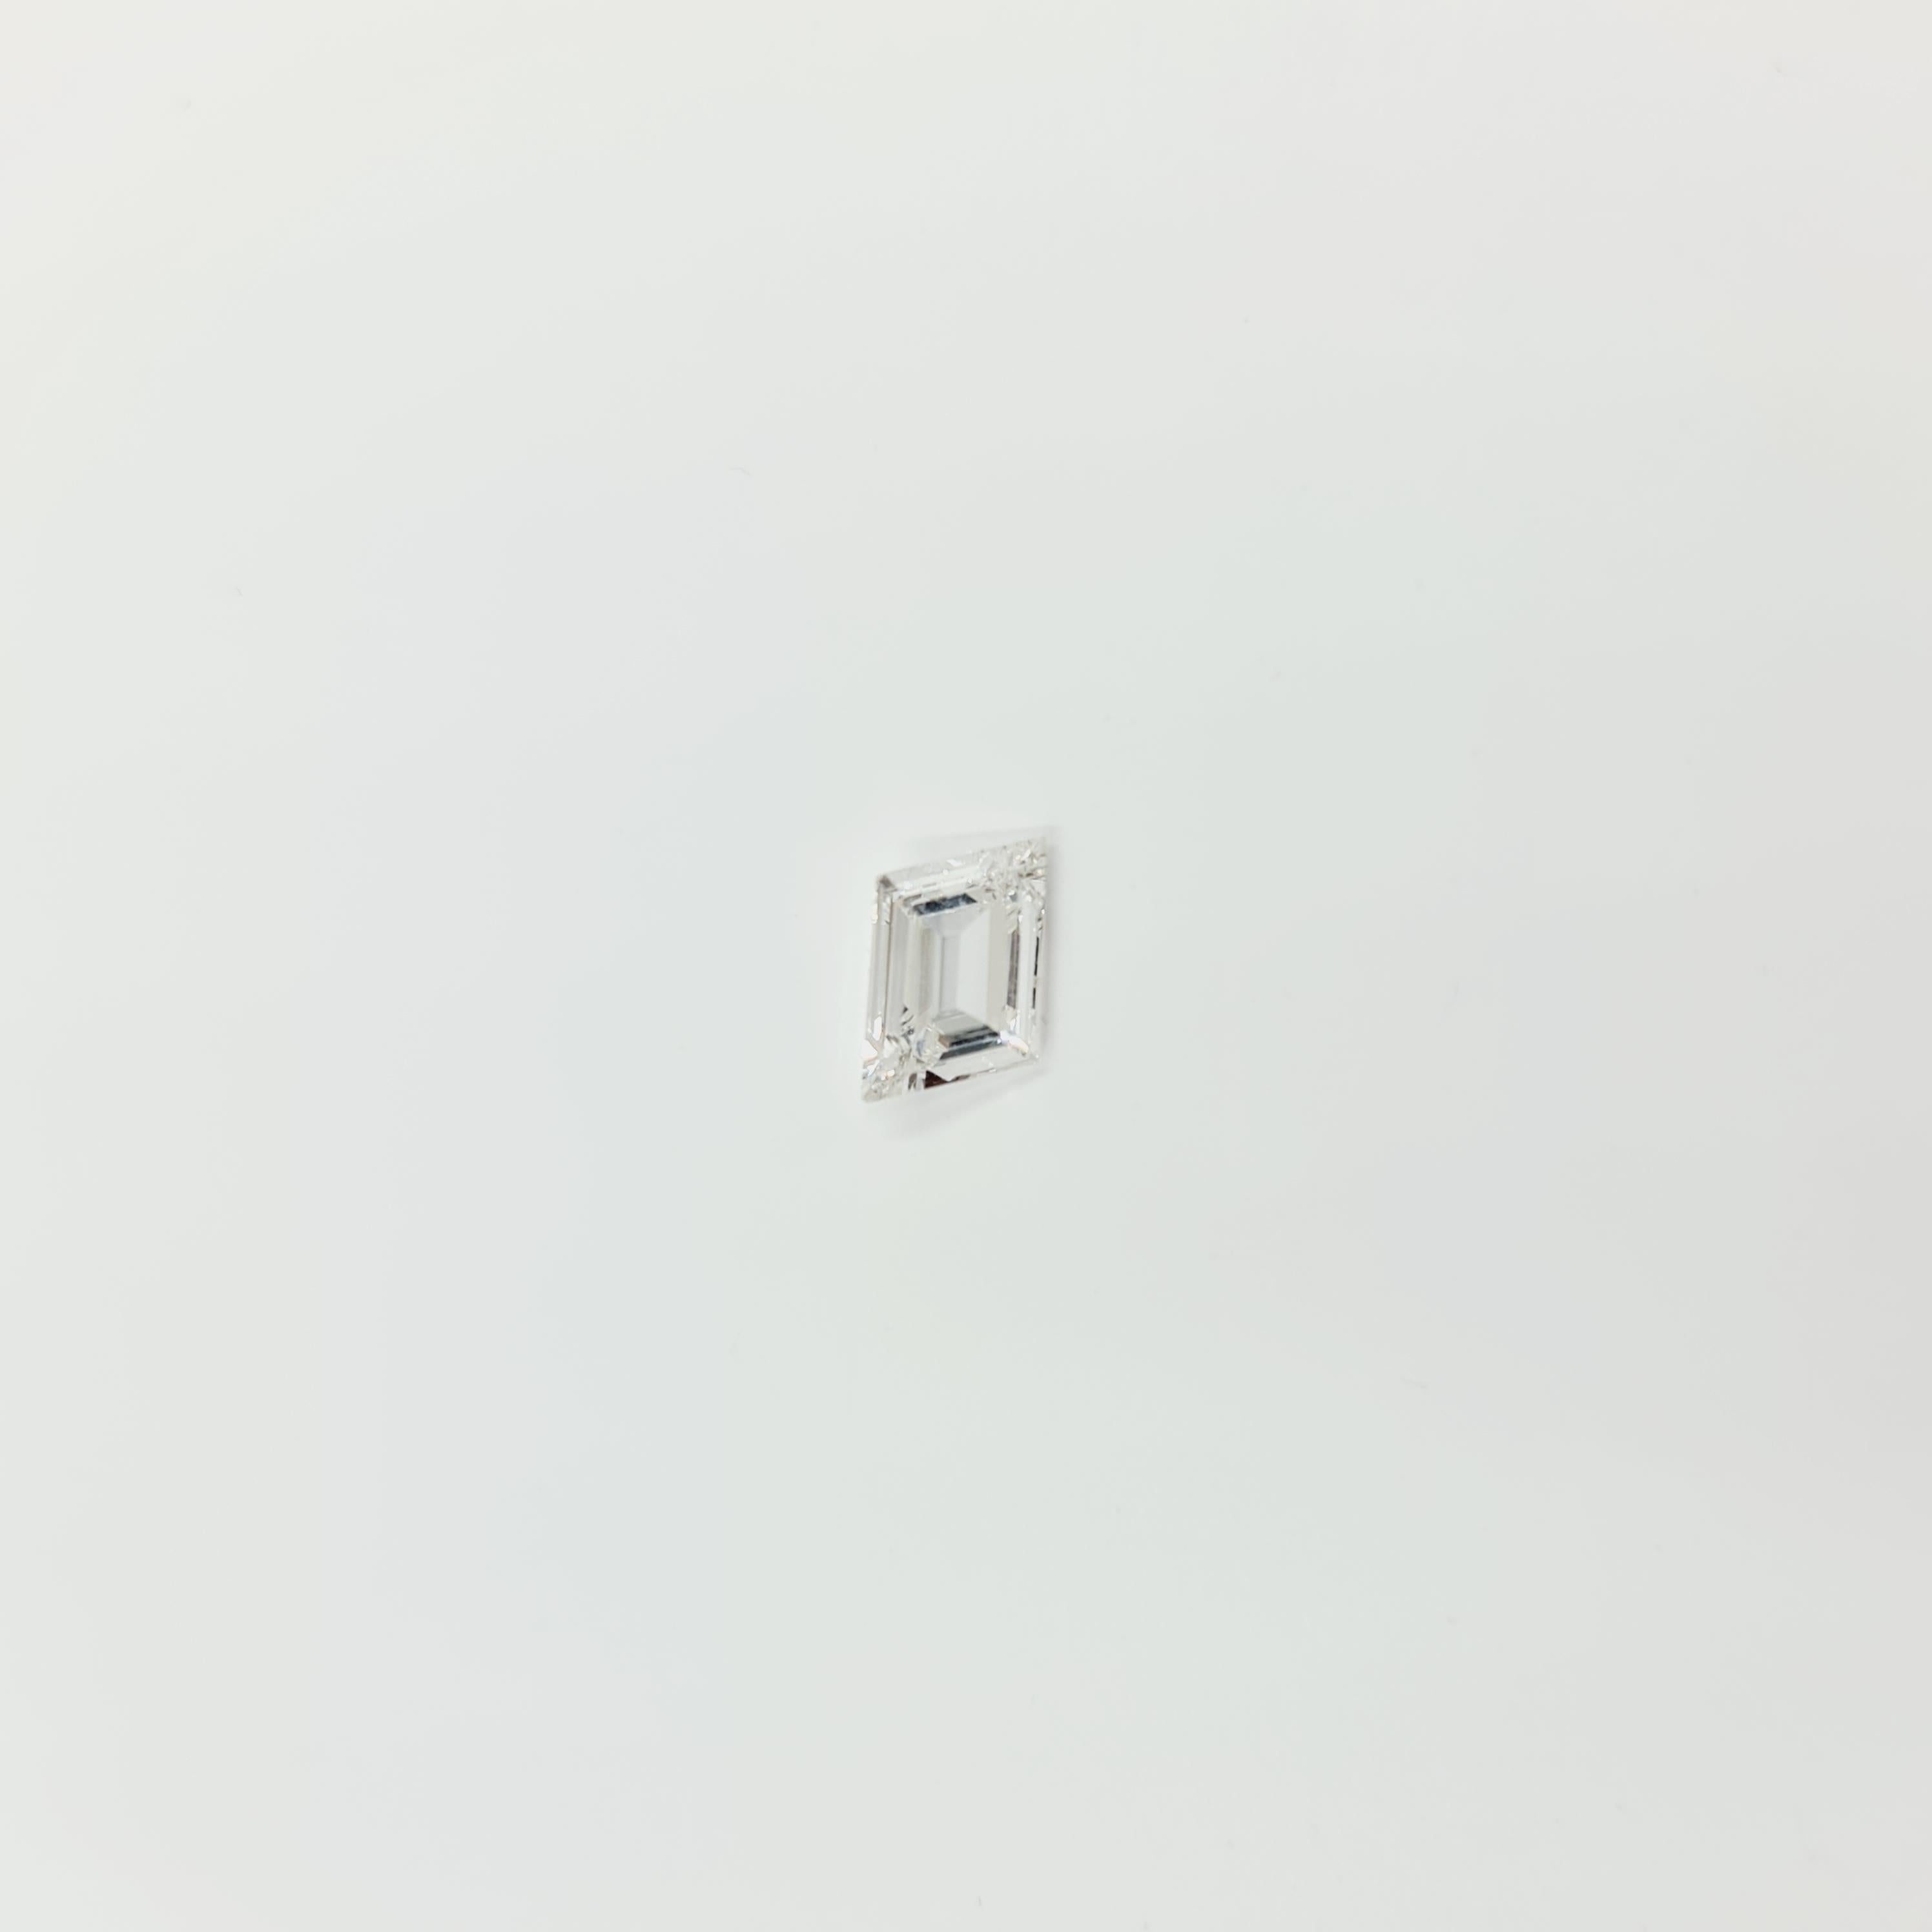 Modern Parallelogram Cut Diamond 0.60 G/IF Solitaire Ring 750 Gold in 4 Prong Setting For Sale